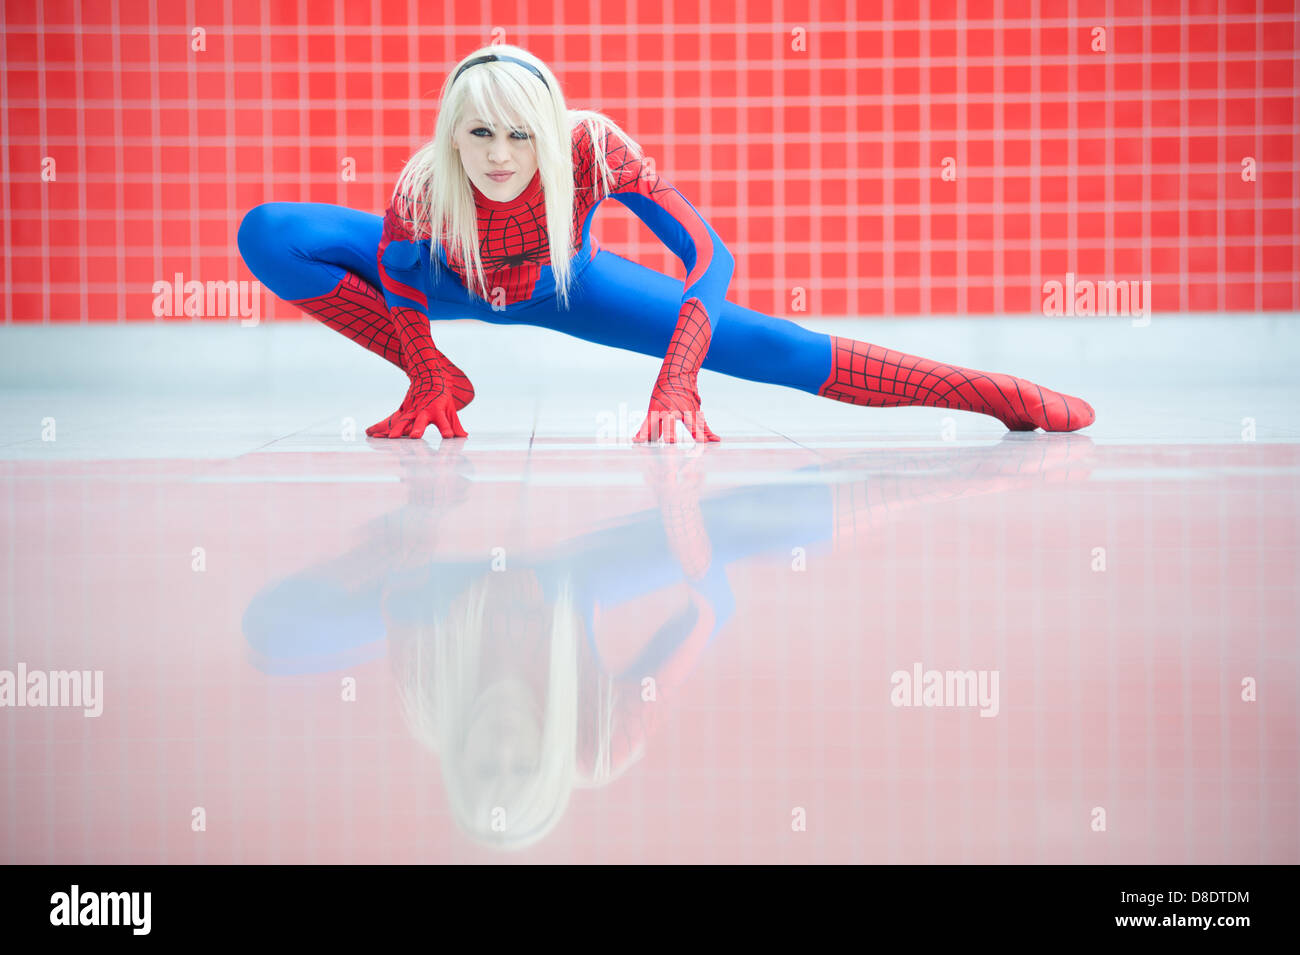 Gwen Stacy: Spider-Woman WIP by CPatrick94 on DeviantArt